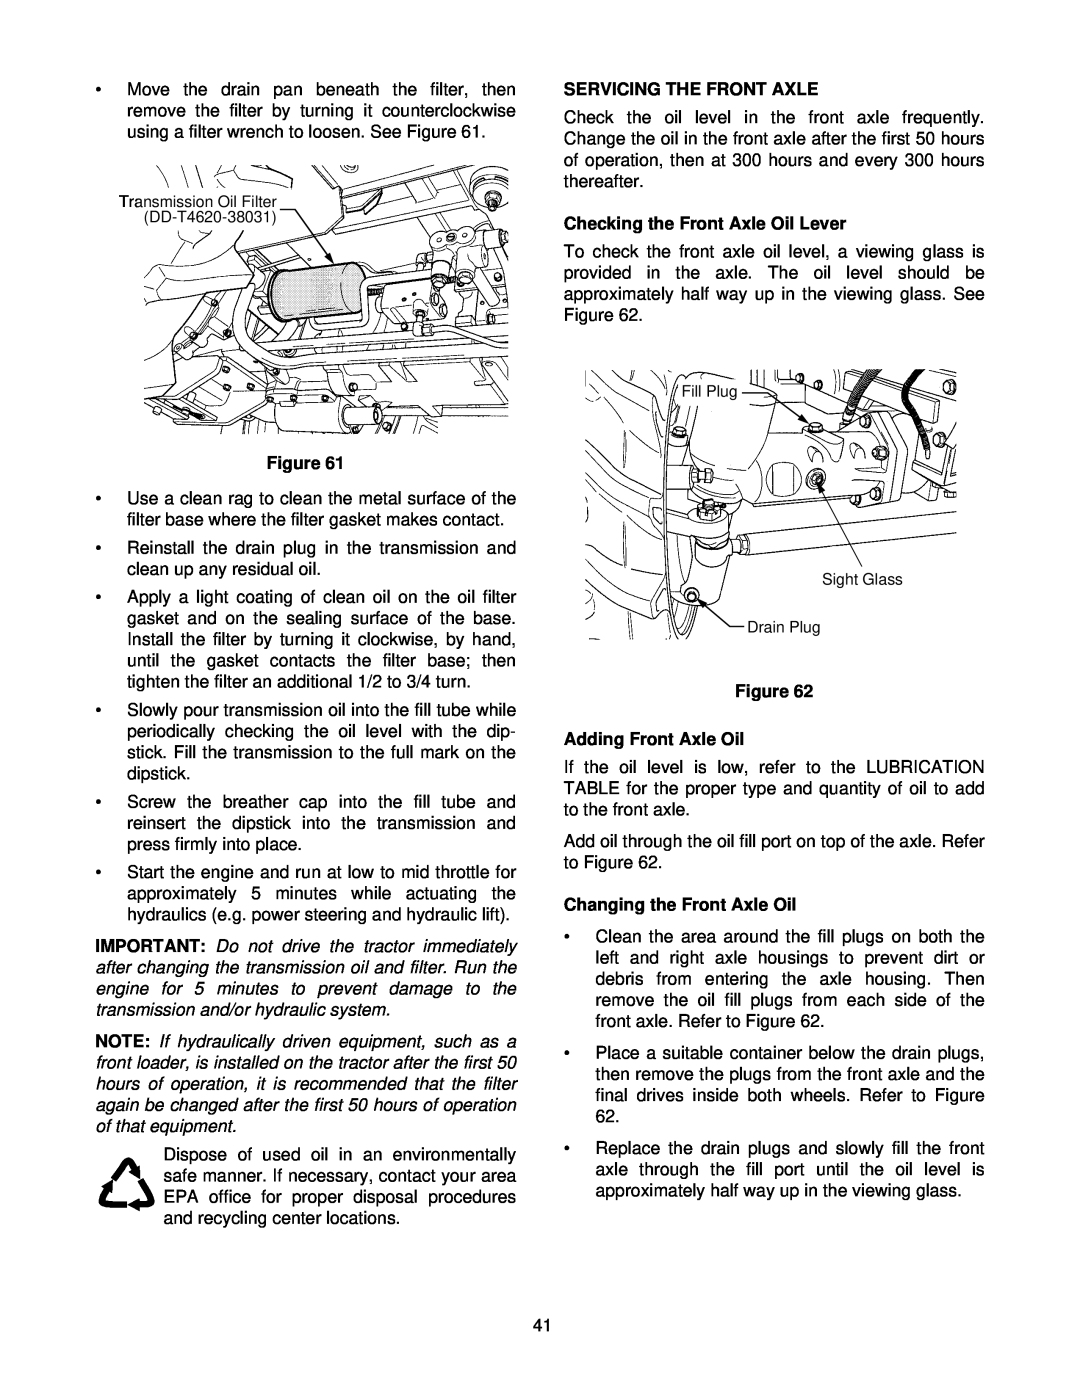 Cub Cadet 8354 manual Servicing The Front Axle, Checking the Front Axle Oil Lever, Figure Adding Front Axle Oil 